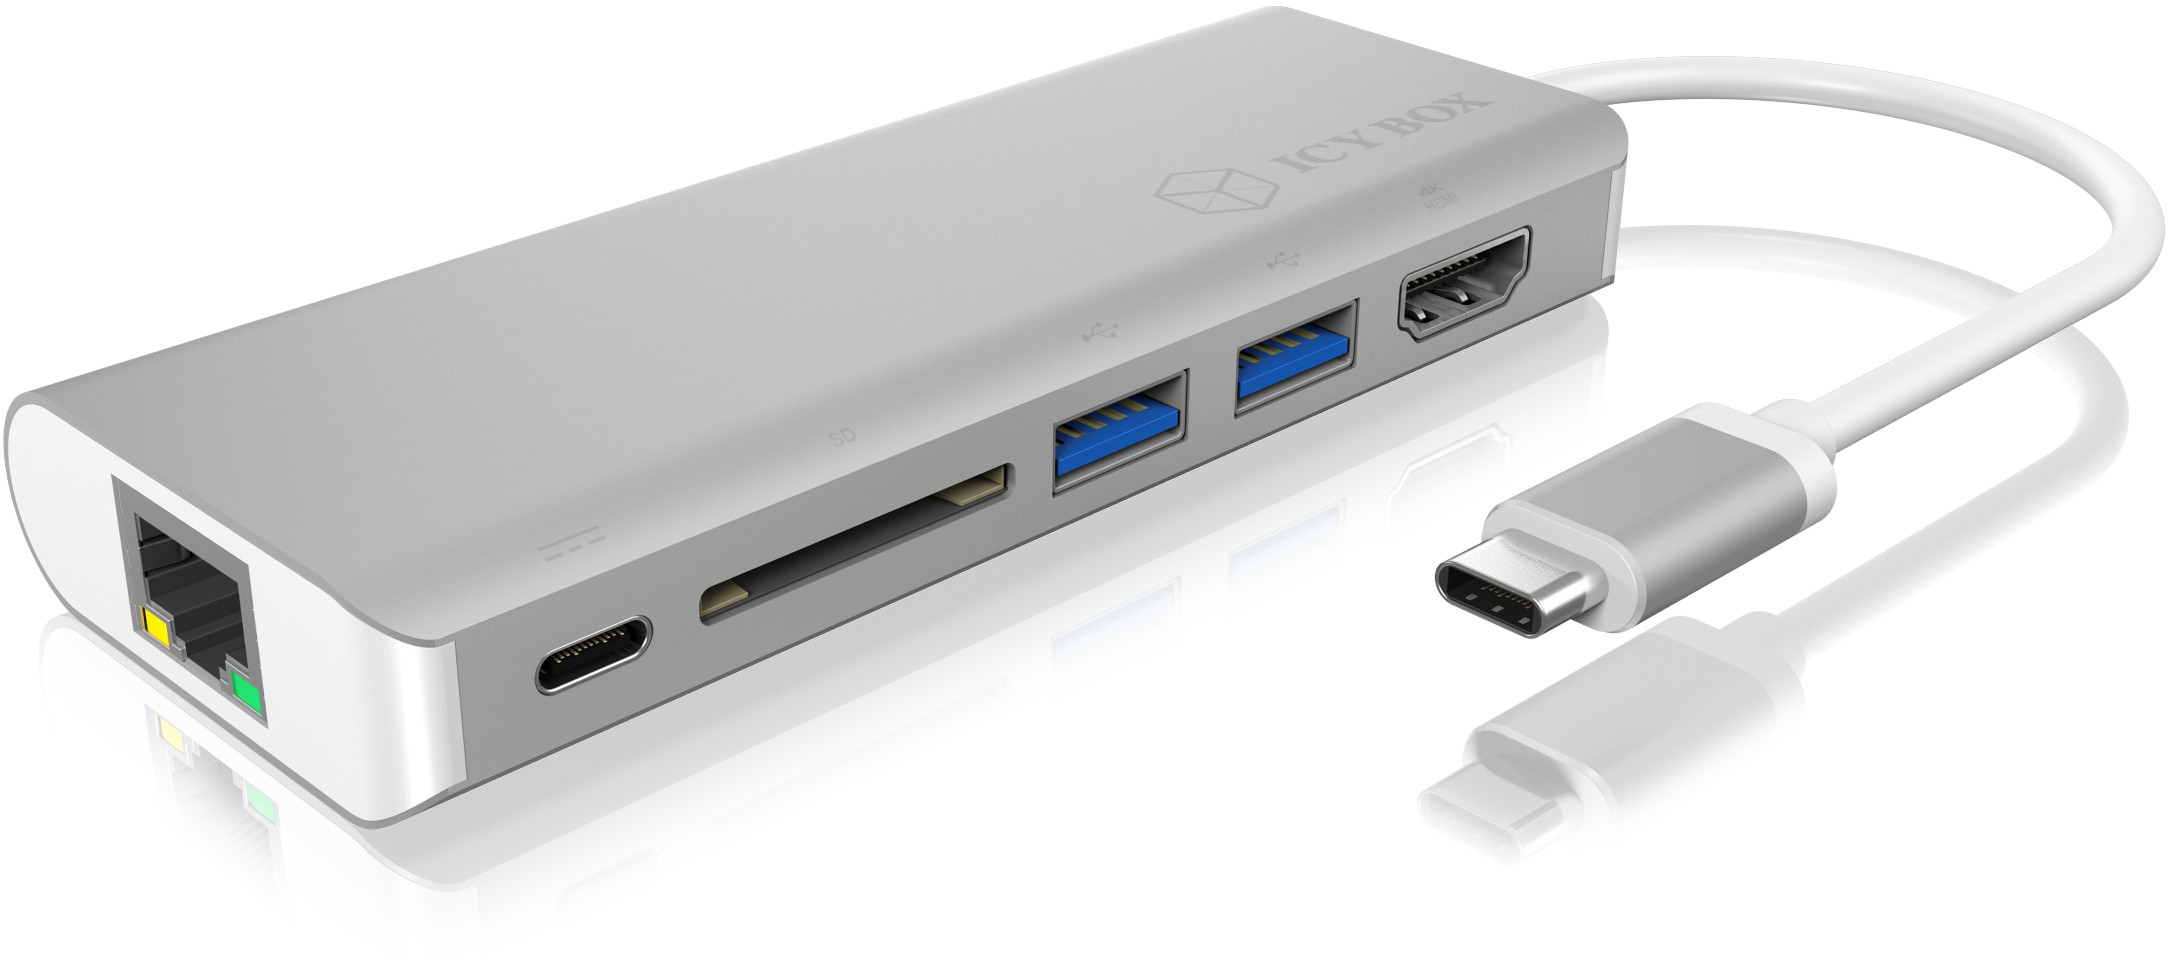 ICY BOX USB Type-C Notebook IB-DK4034-CP Dockingstation silver/white